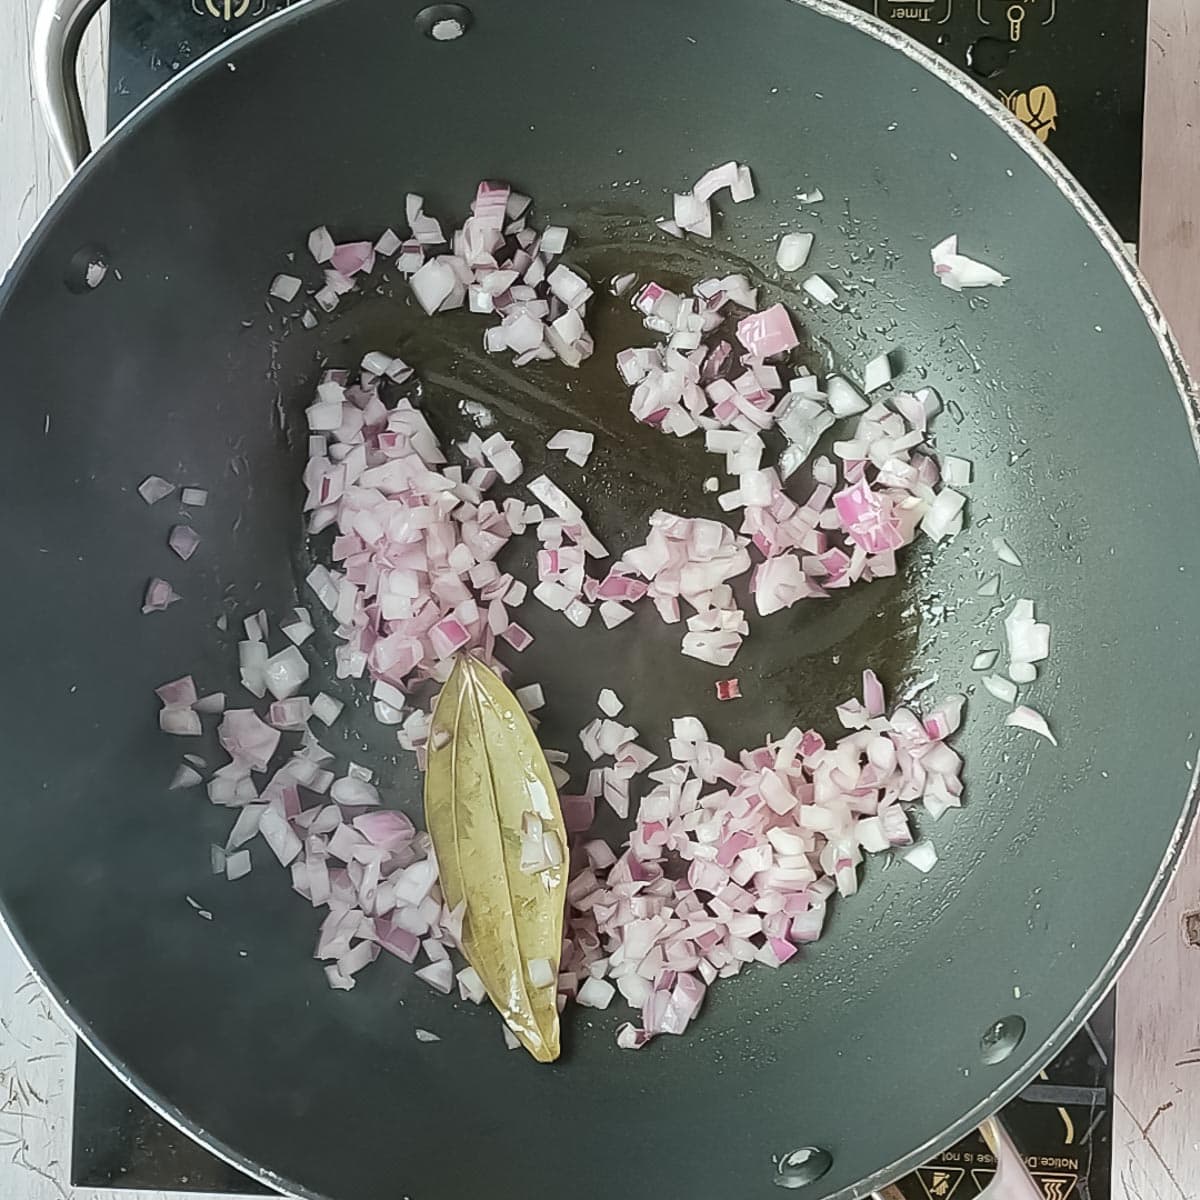 Onions being sauteed in a non-stick pan.